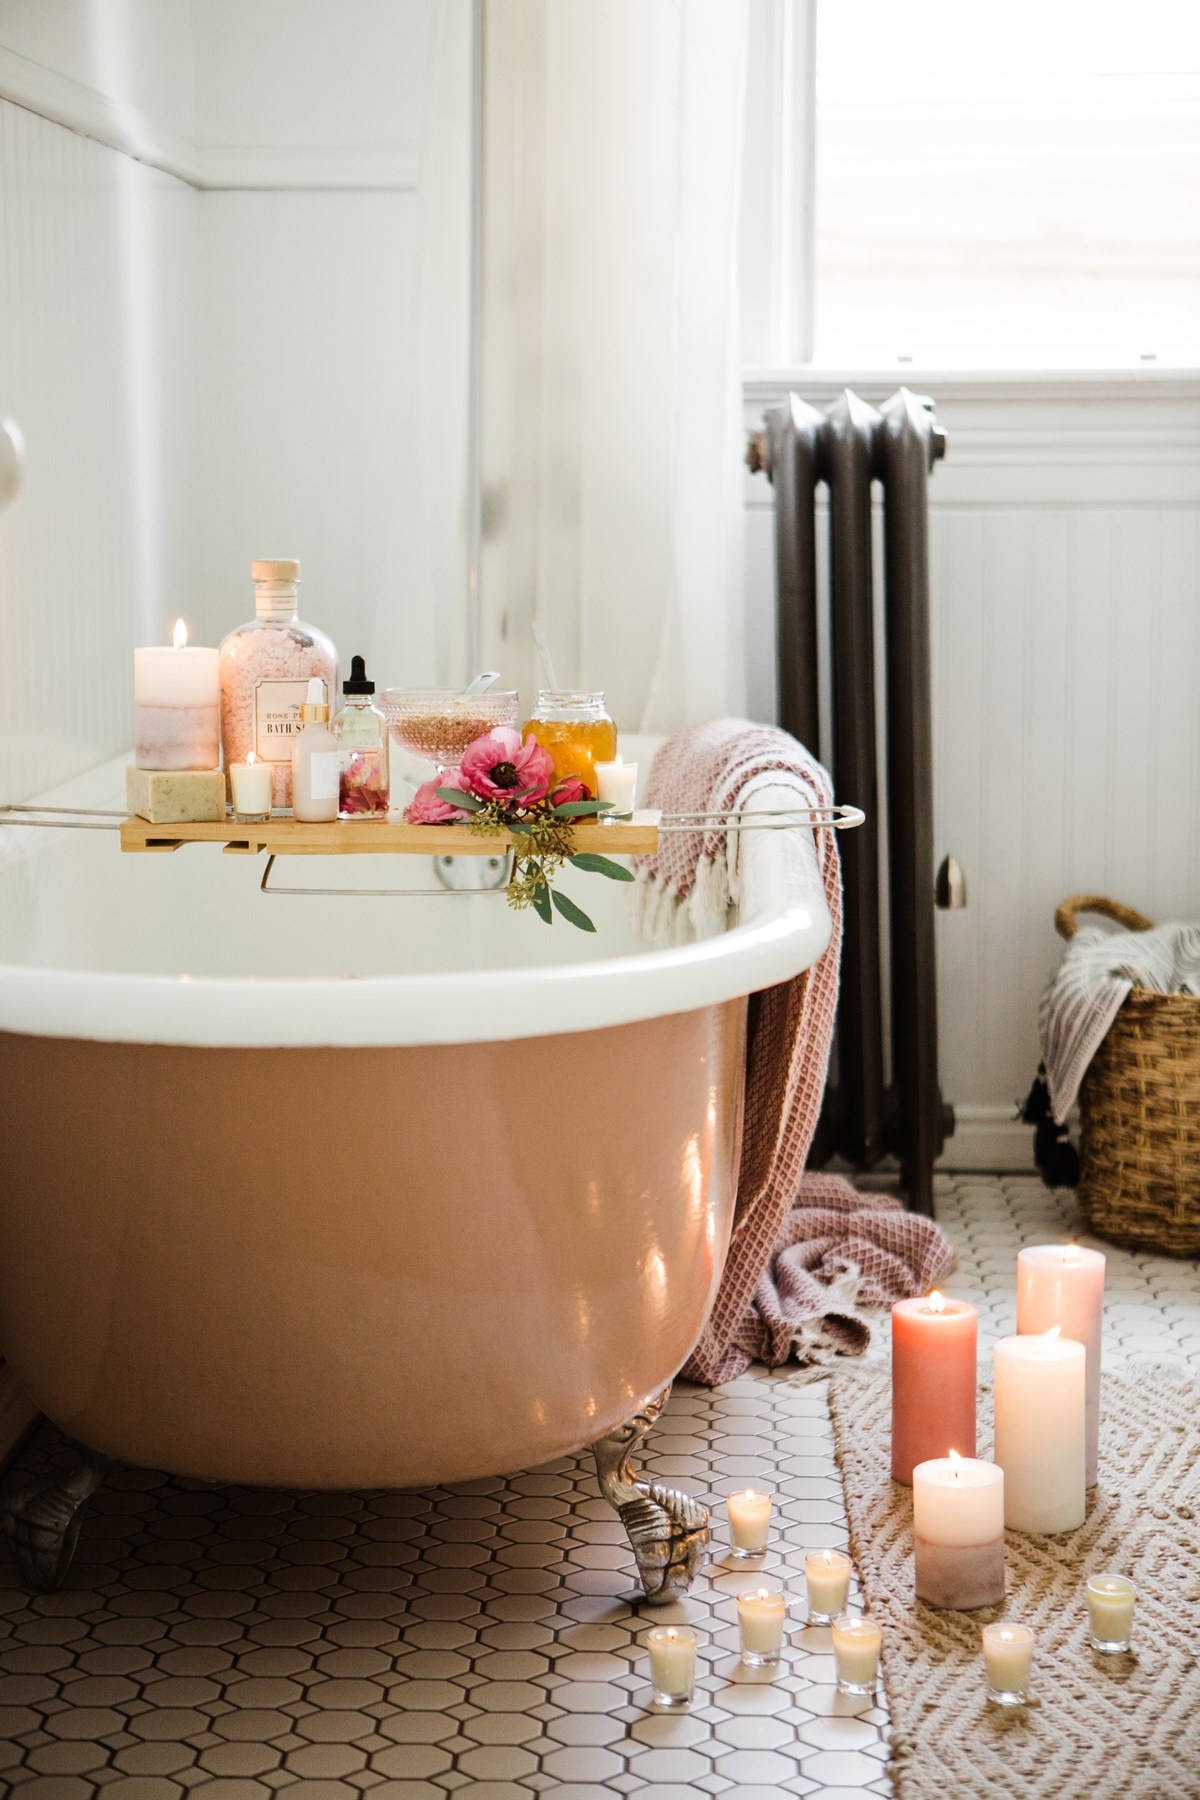 https://wallpapers.com/images/hd/bathtub-with-candles-and-essentials-ibkfvnf7g1rc46p3.jpg